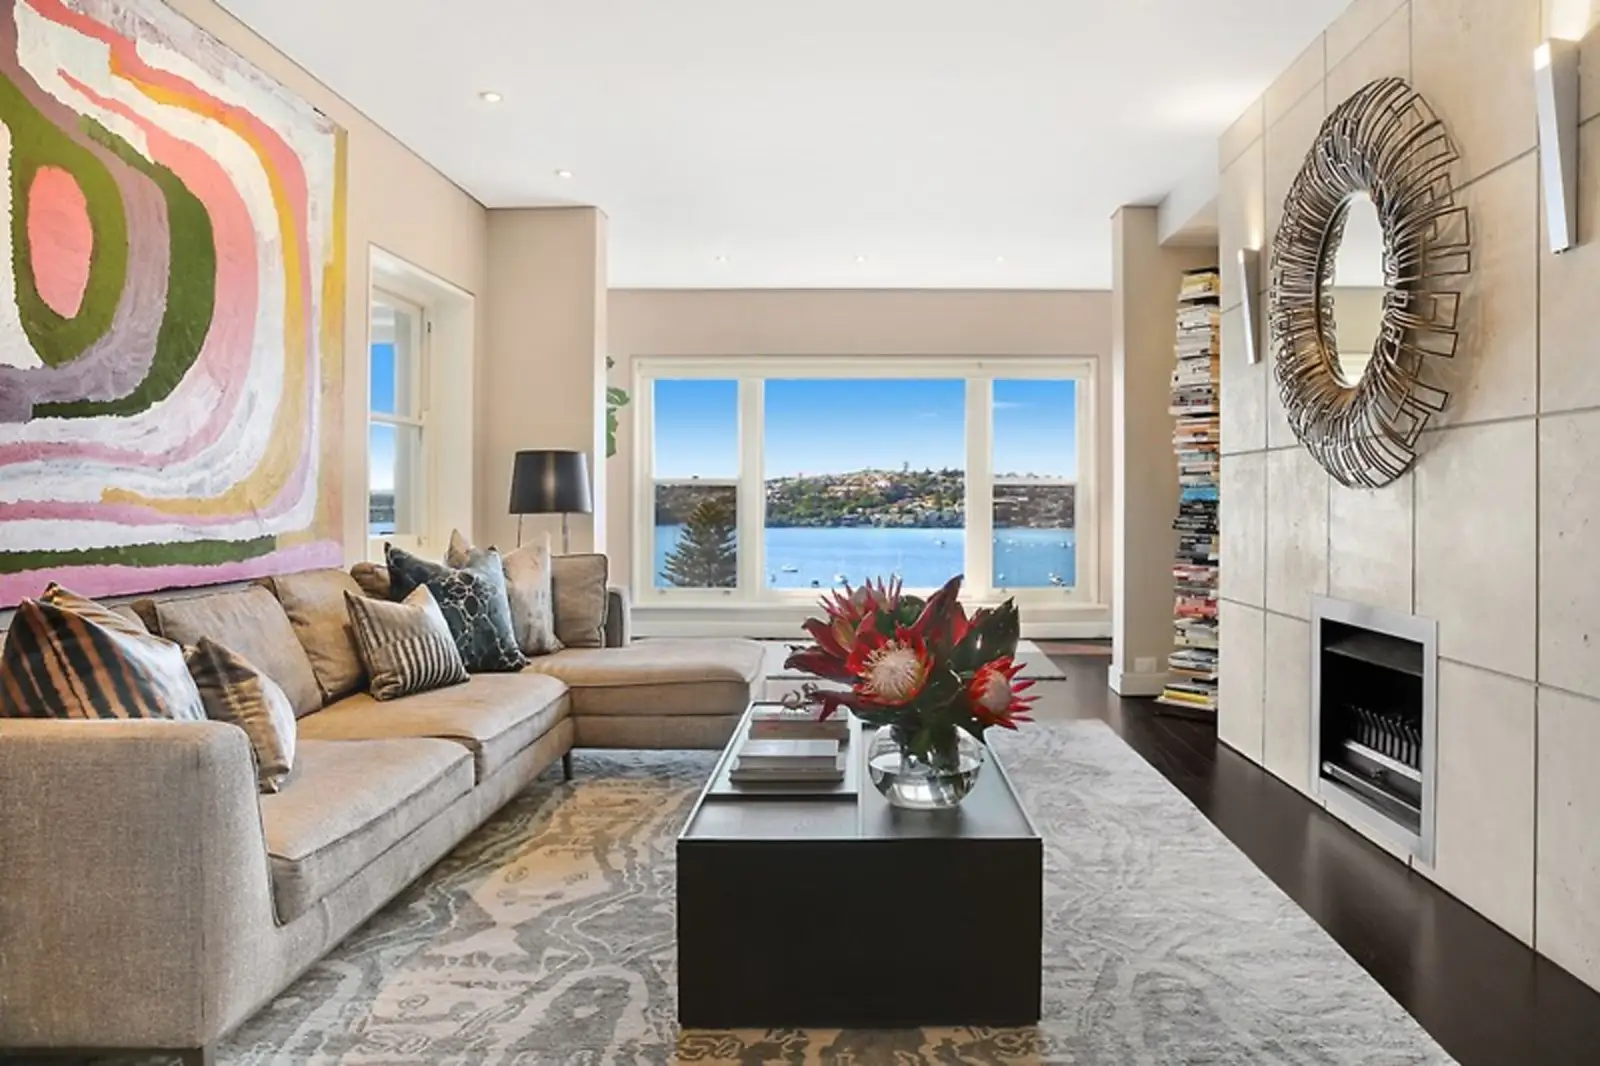 2/6 Aston Gardens, Bellevue Hill Leased by Sydney Sotheby's International Realty - image 2